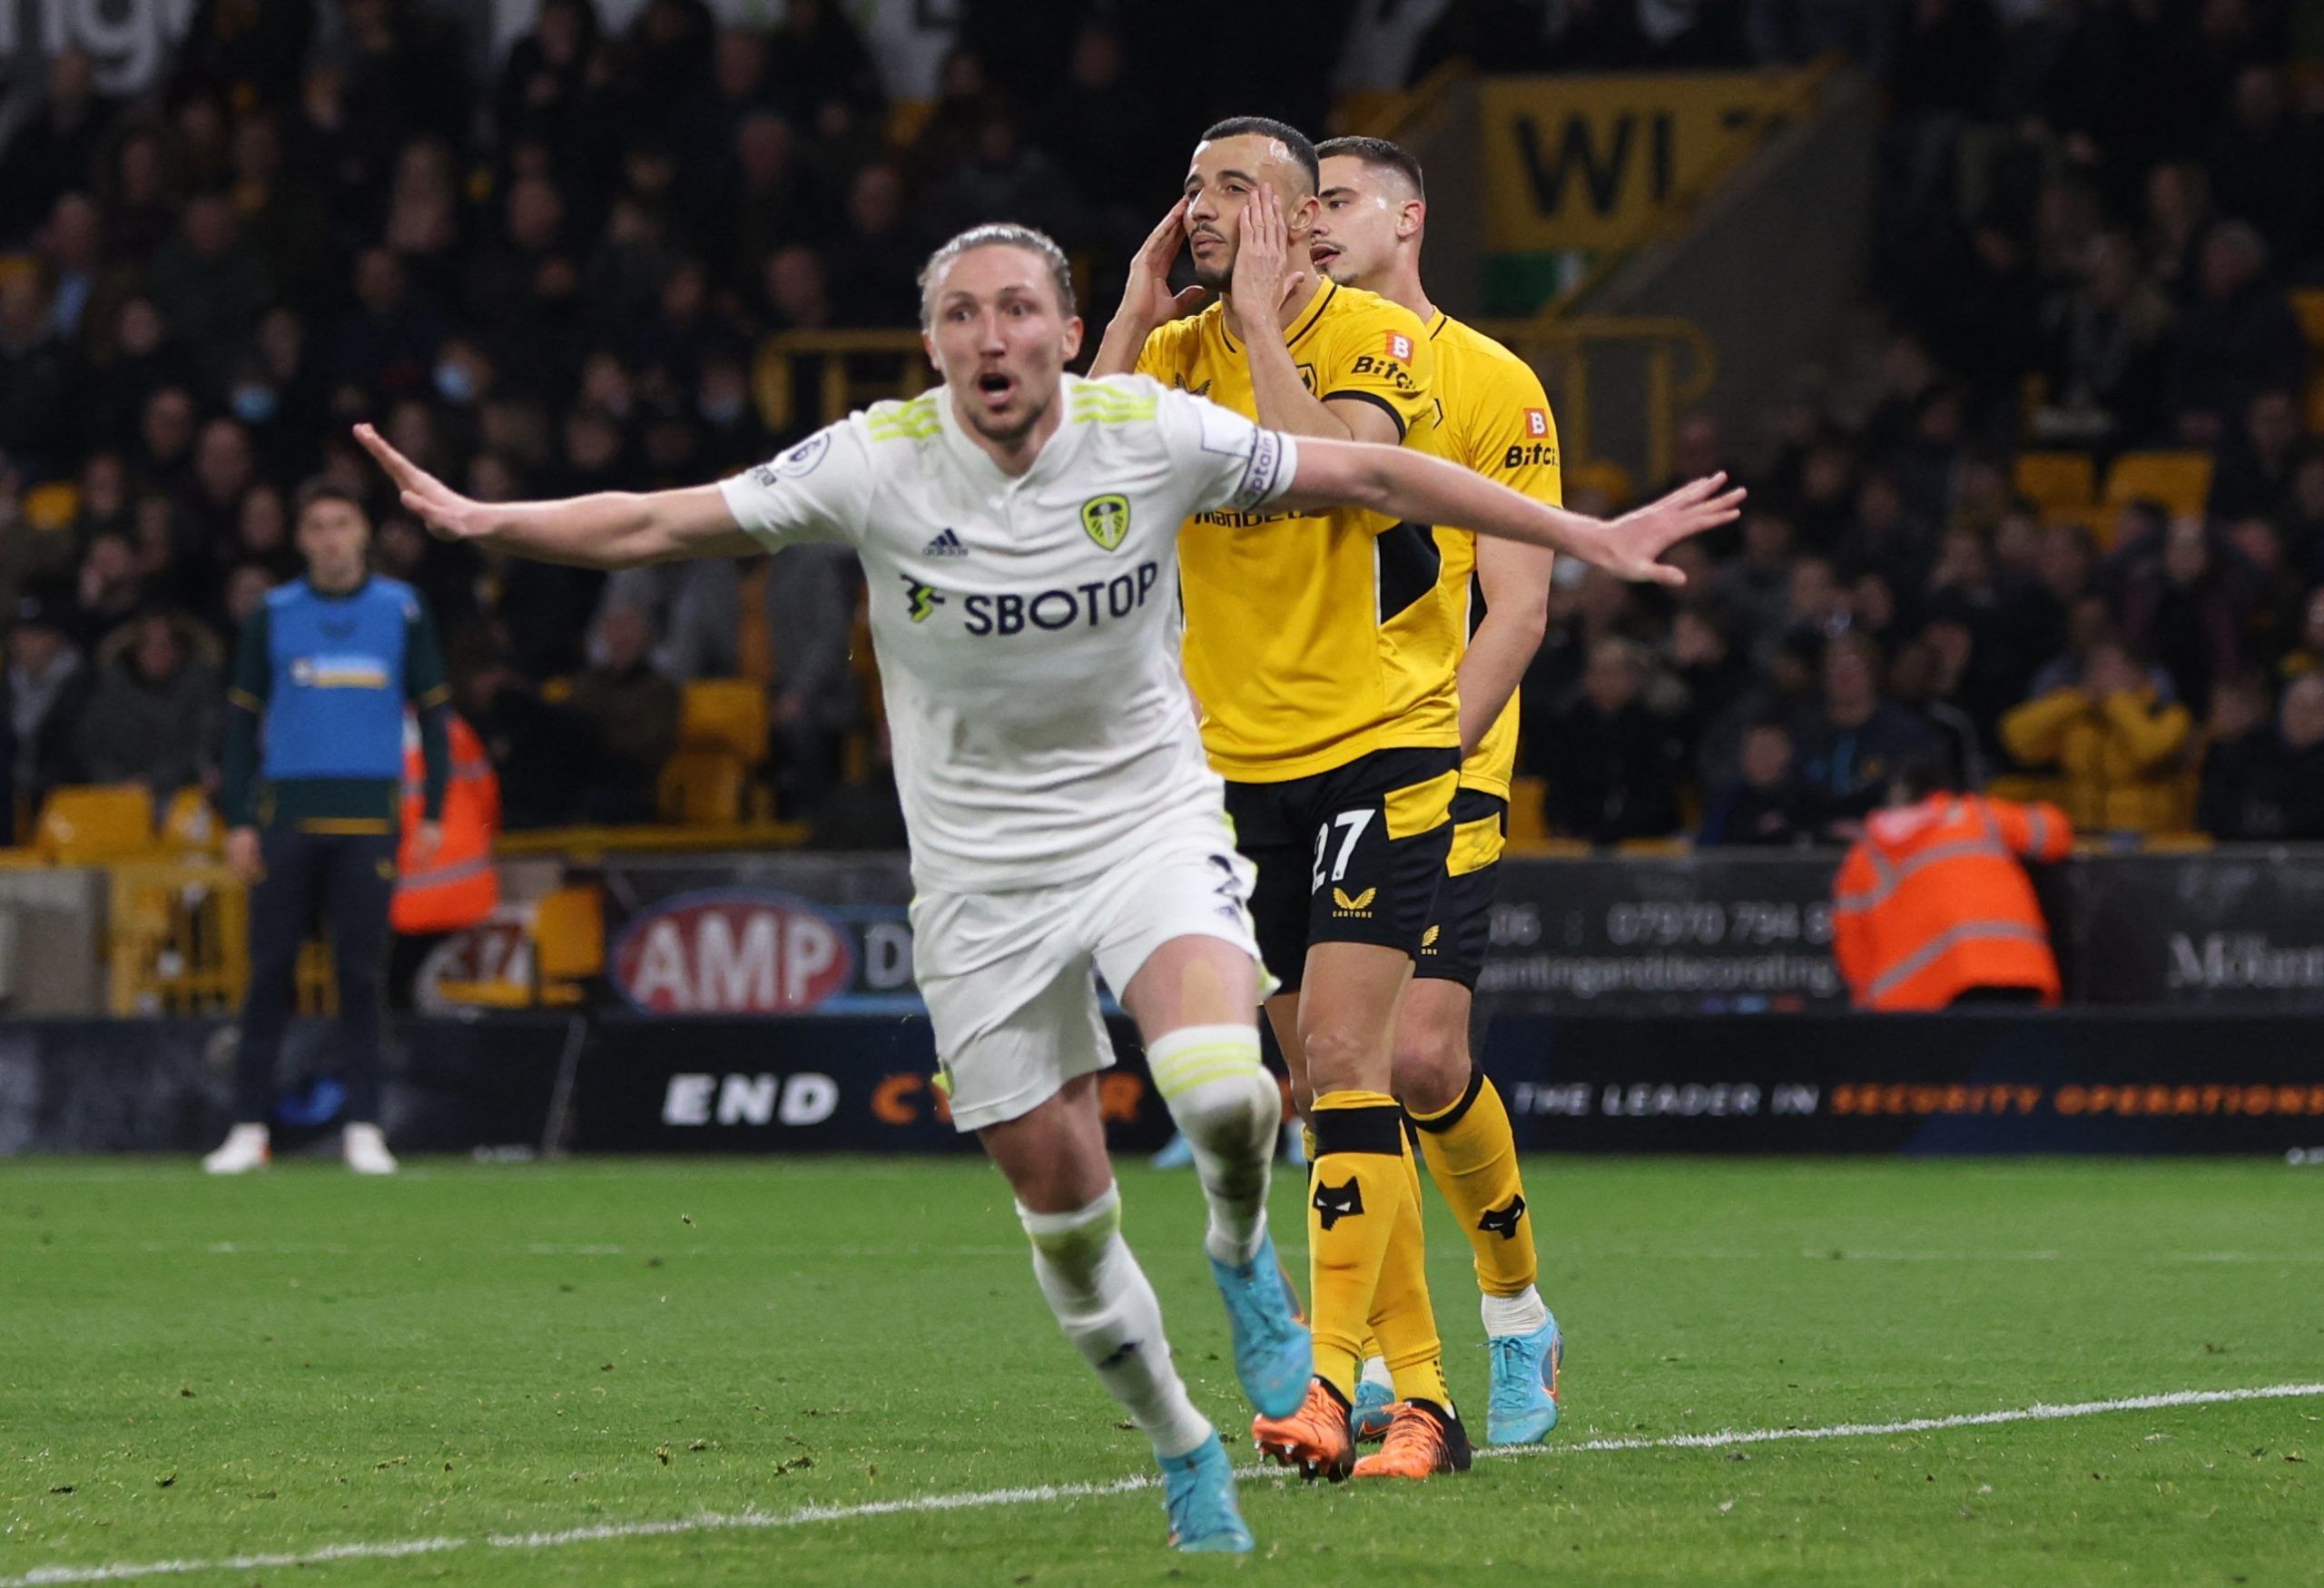 Soccer Football - Premier League - Wolverhampton Wanderers v Leeds United - Molineux Stadium, Wolverhampton, Britain - March 18, 2022 Wolverhampton Wanderers' Romain Saiss looks dejected as Leeds United's Luke Ayling celebrates scoring their third goal Action Images via Reuters/Paul Childs EDITORIAL USE ONLY. No use with unauthorized audio, video, data, fixture lists, club/league logos or 'live' services. Online in-match use limited to 75 images, no video emulation. No use in betting, games or s